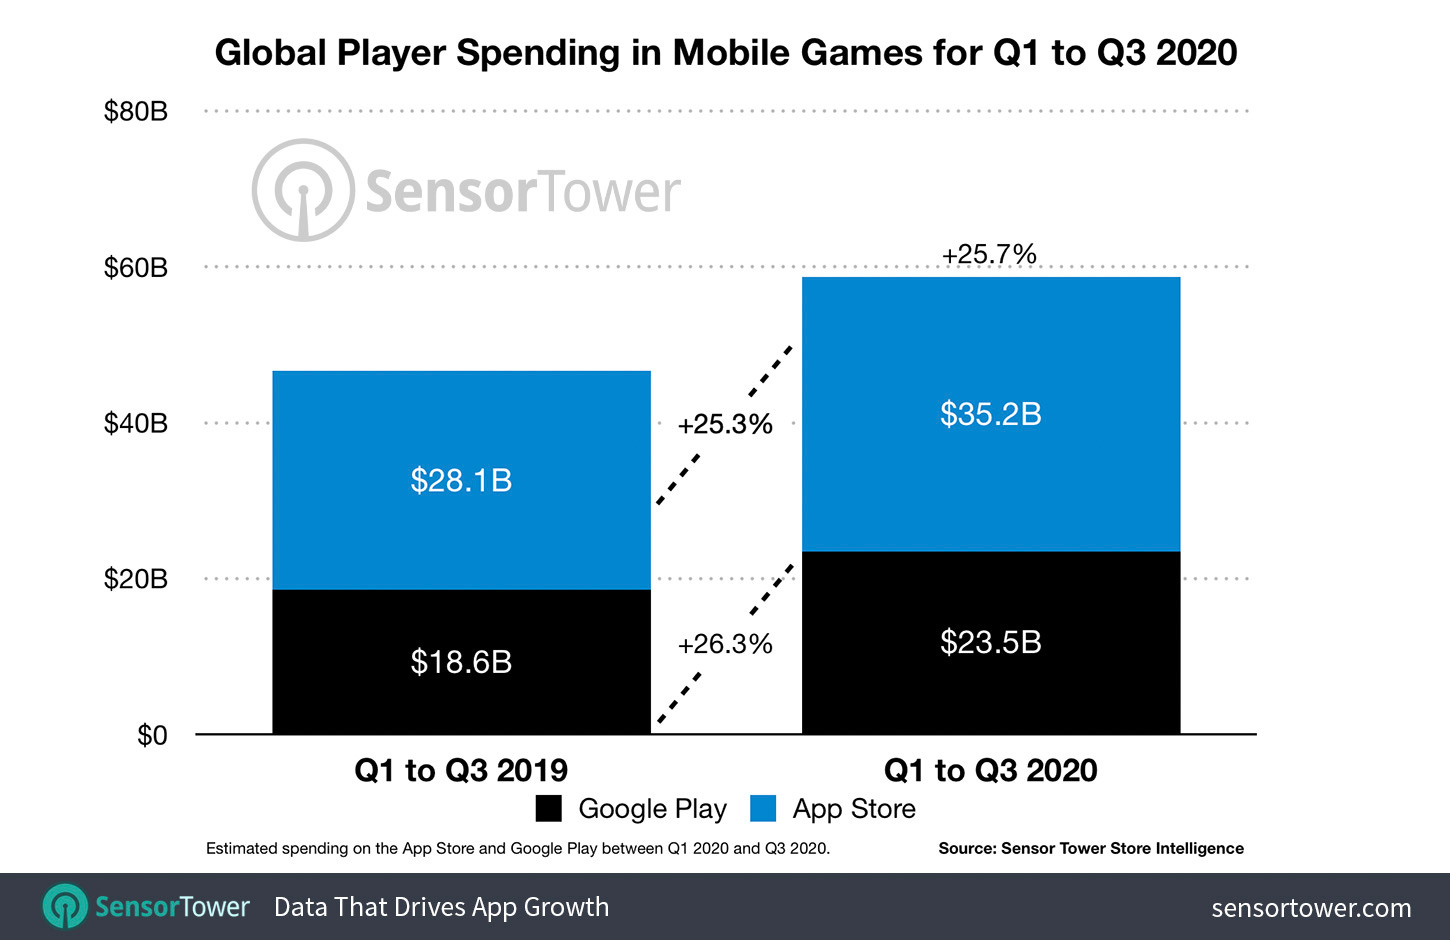 Global Player Spending in Mobile Games for Q1 to Q3 2020